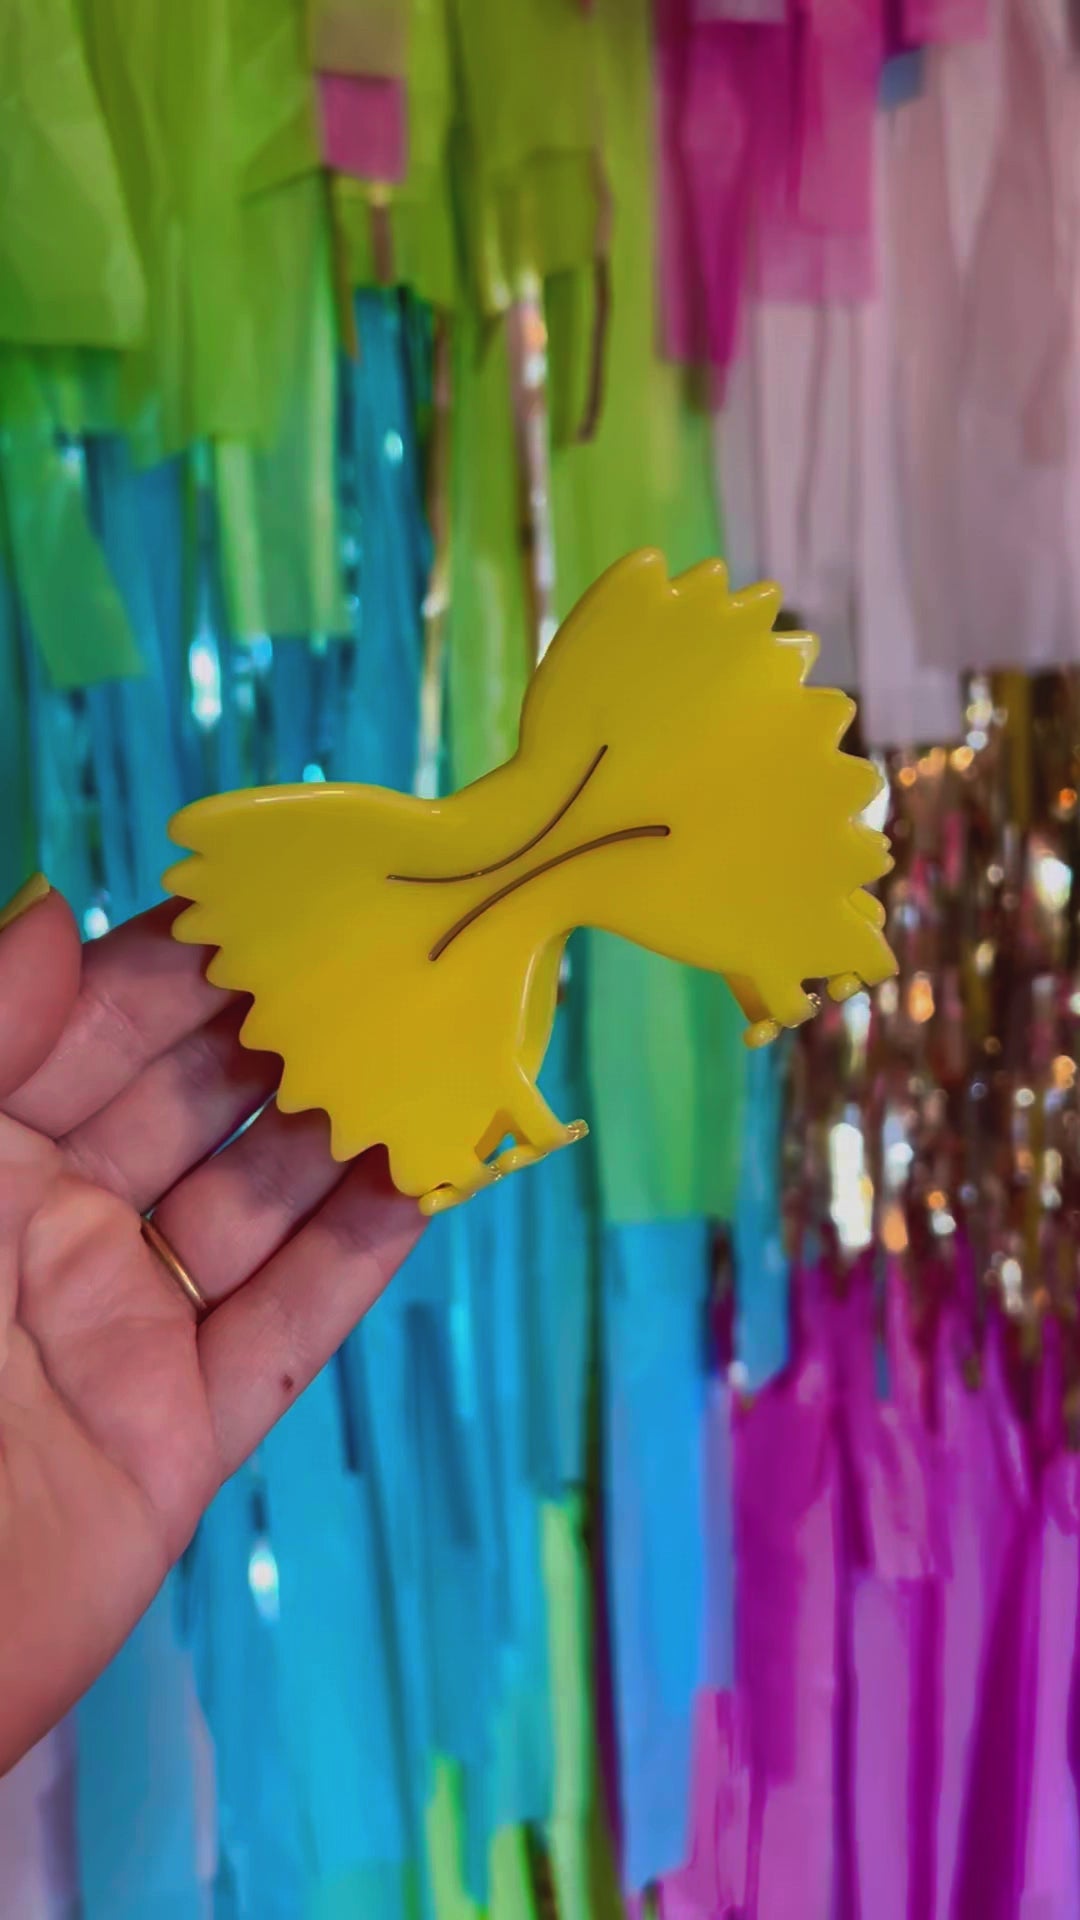 Video shows model's hand opening and closing a farfalle pasta hair clip against a multicolored tinsel backdrop